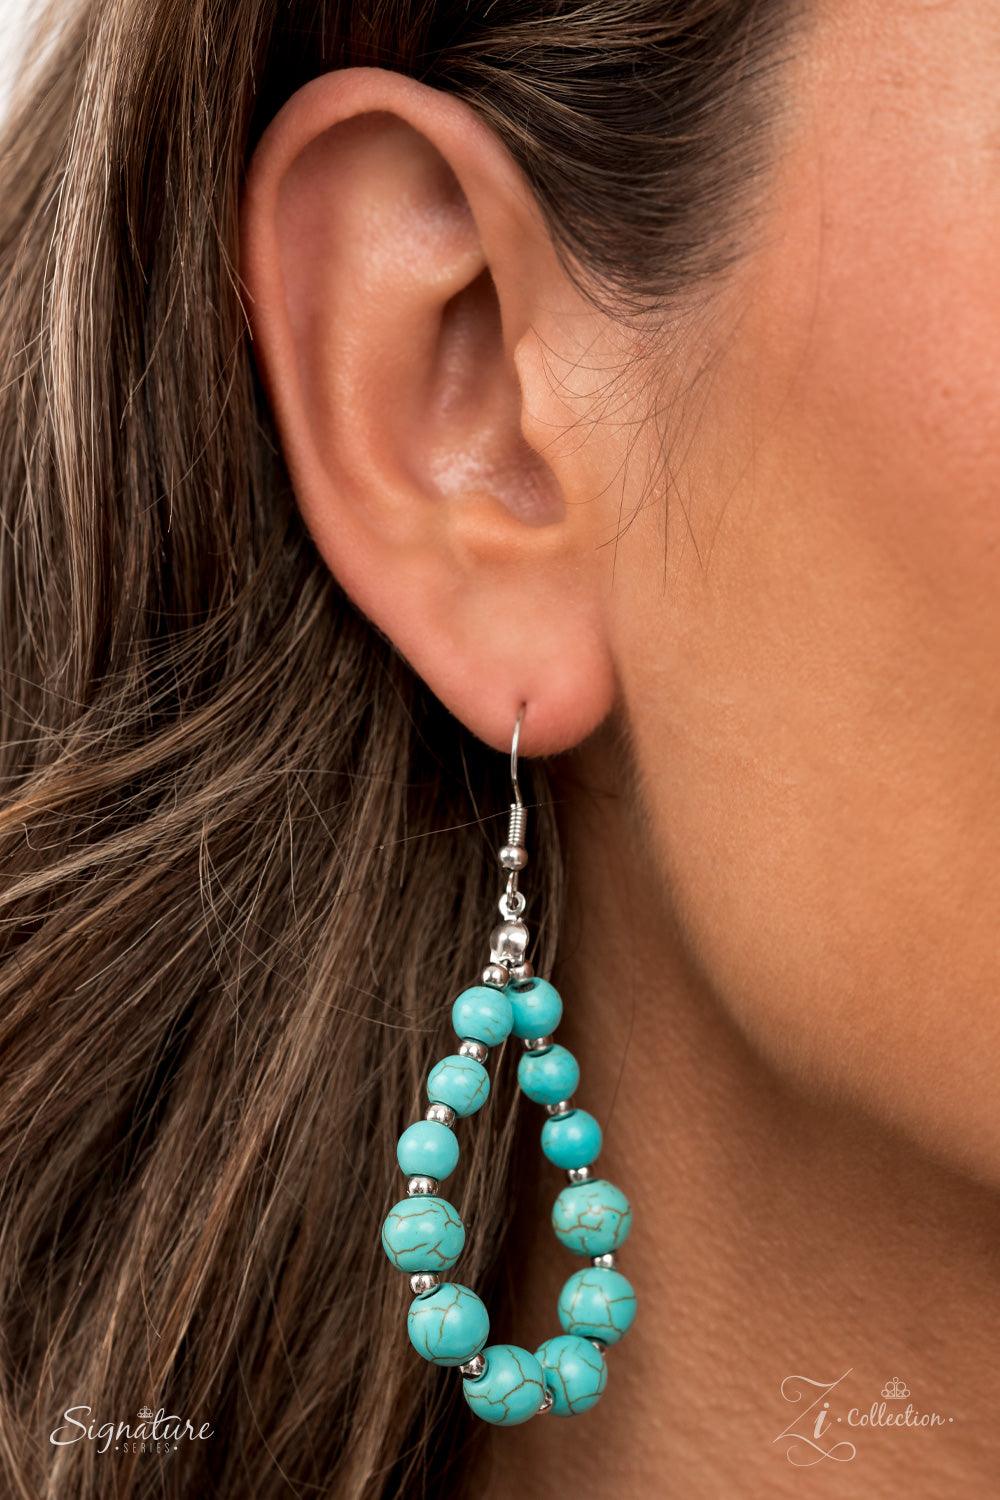 Paparazzi Accessories The Hilary Intermixed with dainty silver beads, a groundbreaking display of refreshing turquoise stone beads gradually increases in size as they drape into artisan inspired layers down the chest. The trailblazing length combined with